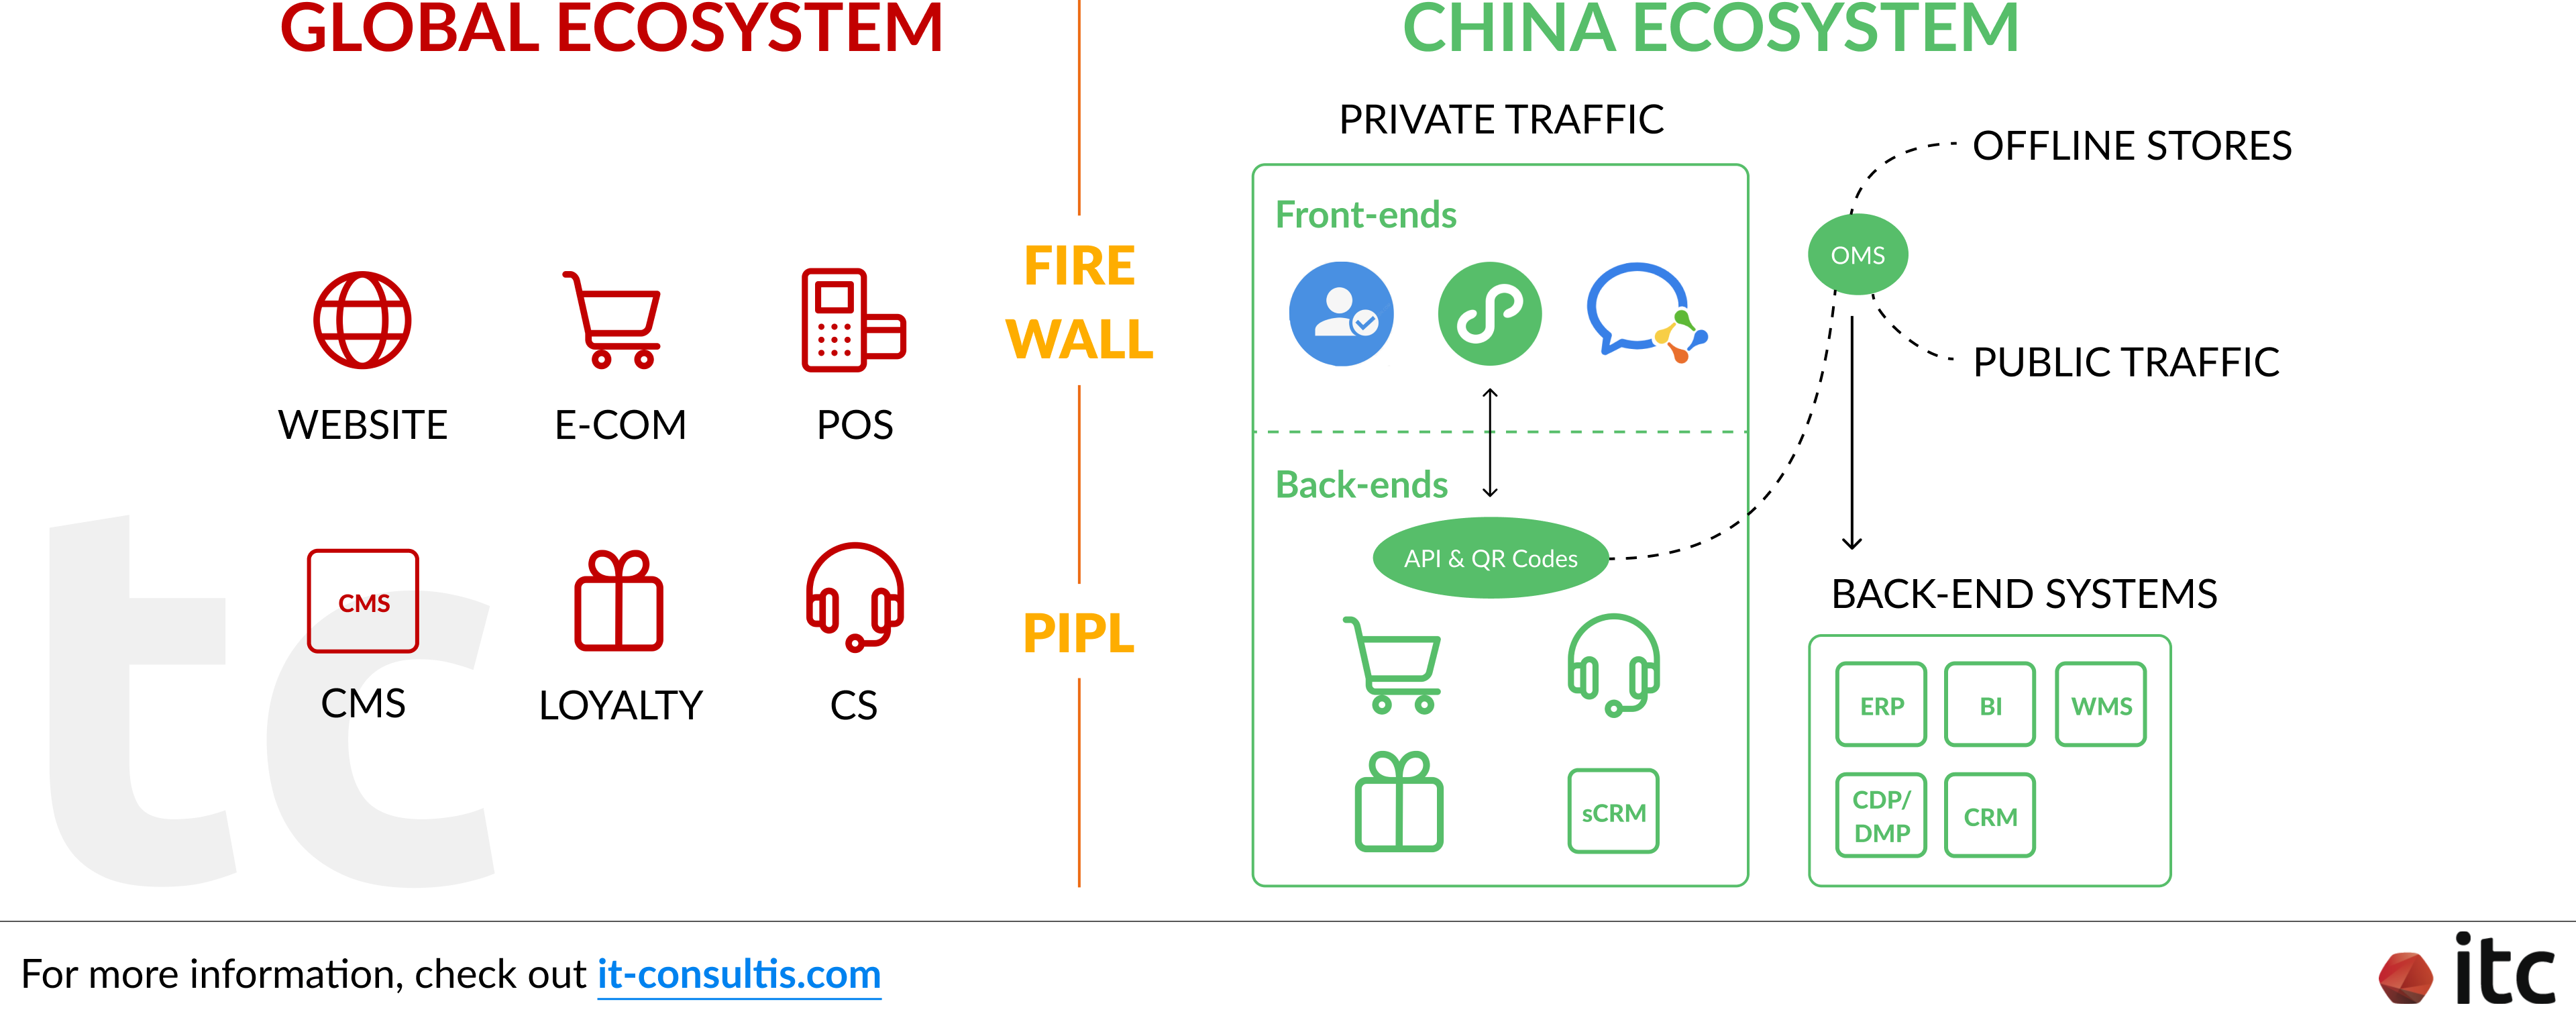 Connecting your China eCommerce systems with your global eCommerce systems while complying with PIPL and minimize negative effects from the Great Firewall